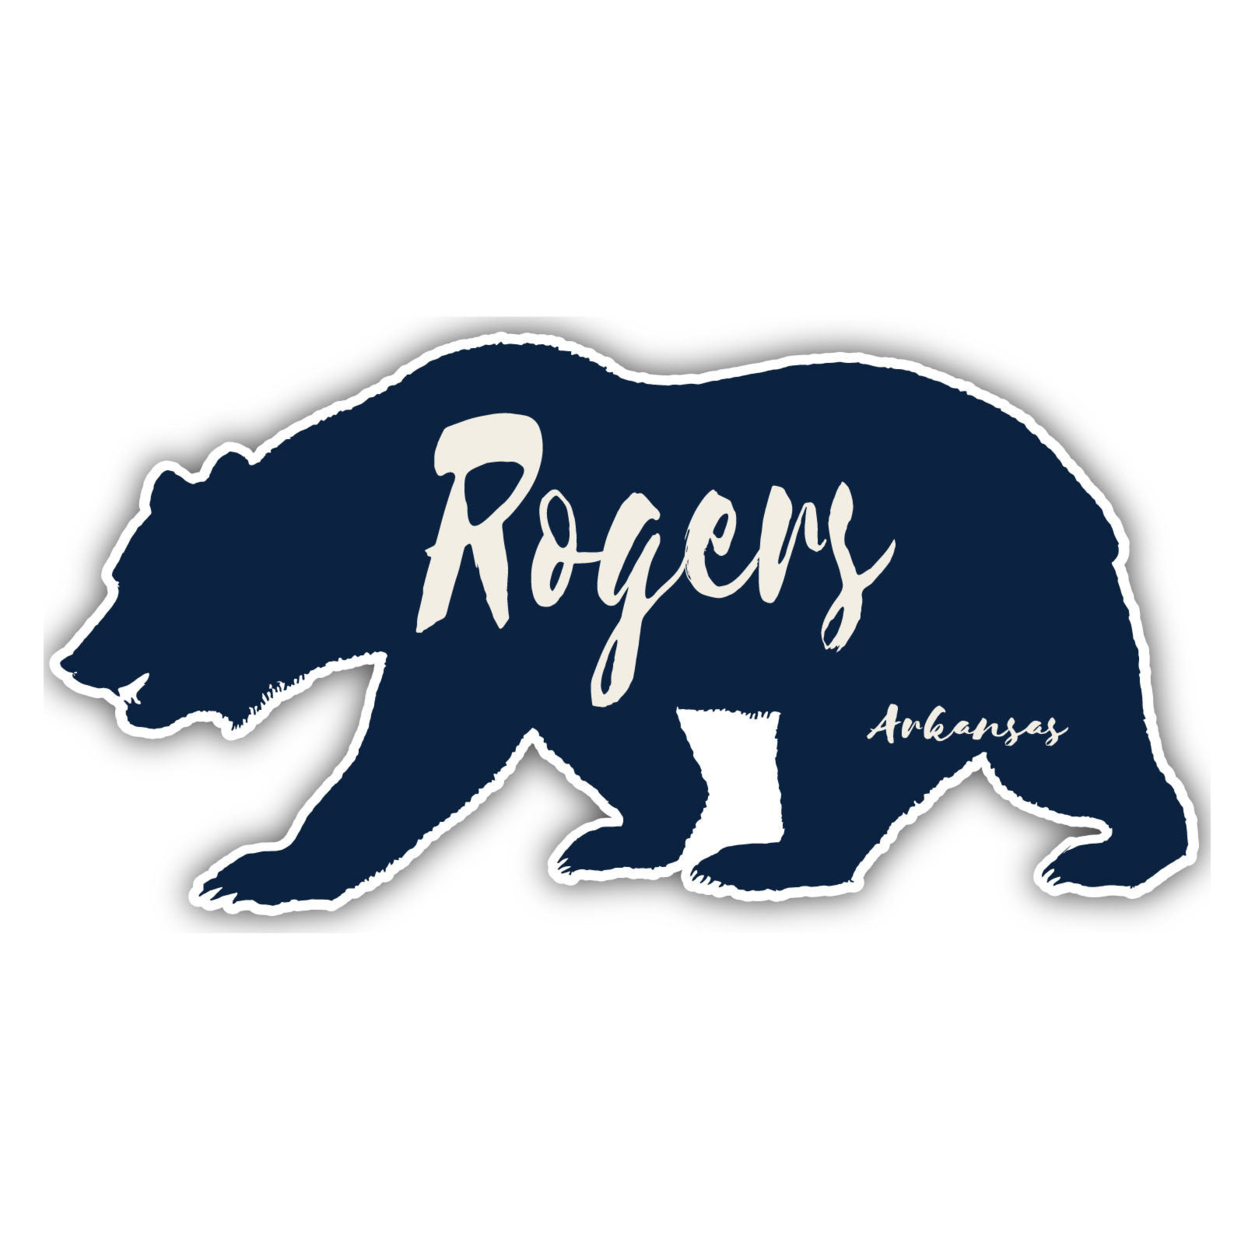 Rogers Arkansas Souvenir Decorative Stickers (Choose Theme And Size) - Single Unit, 2-Inch, Great Outdoors